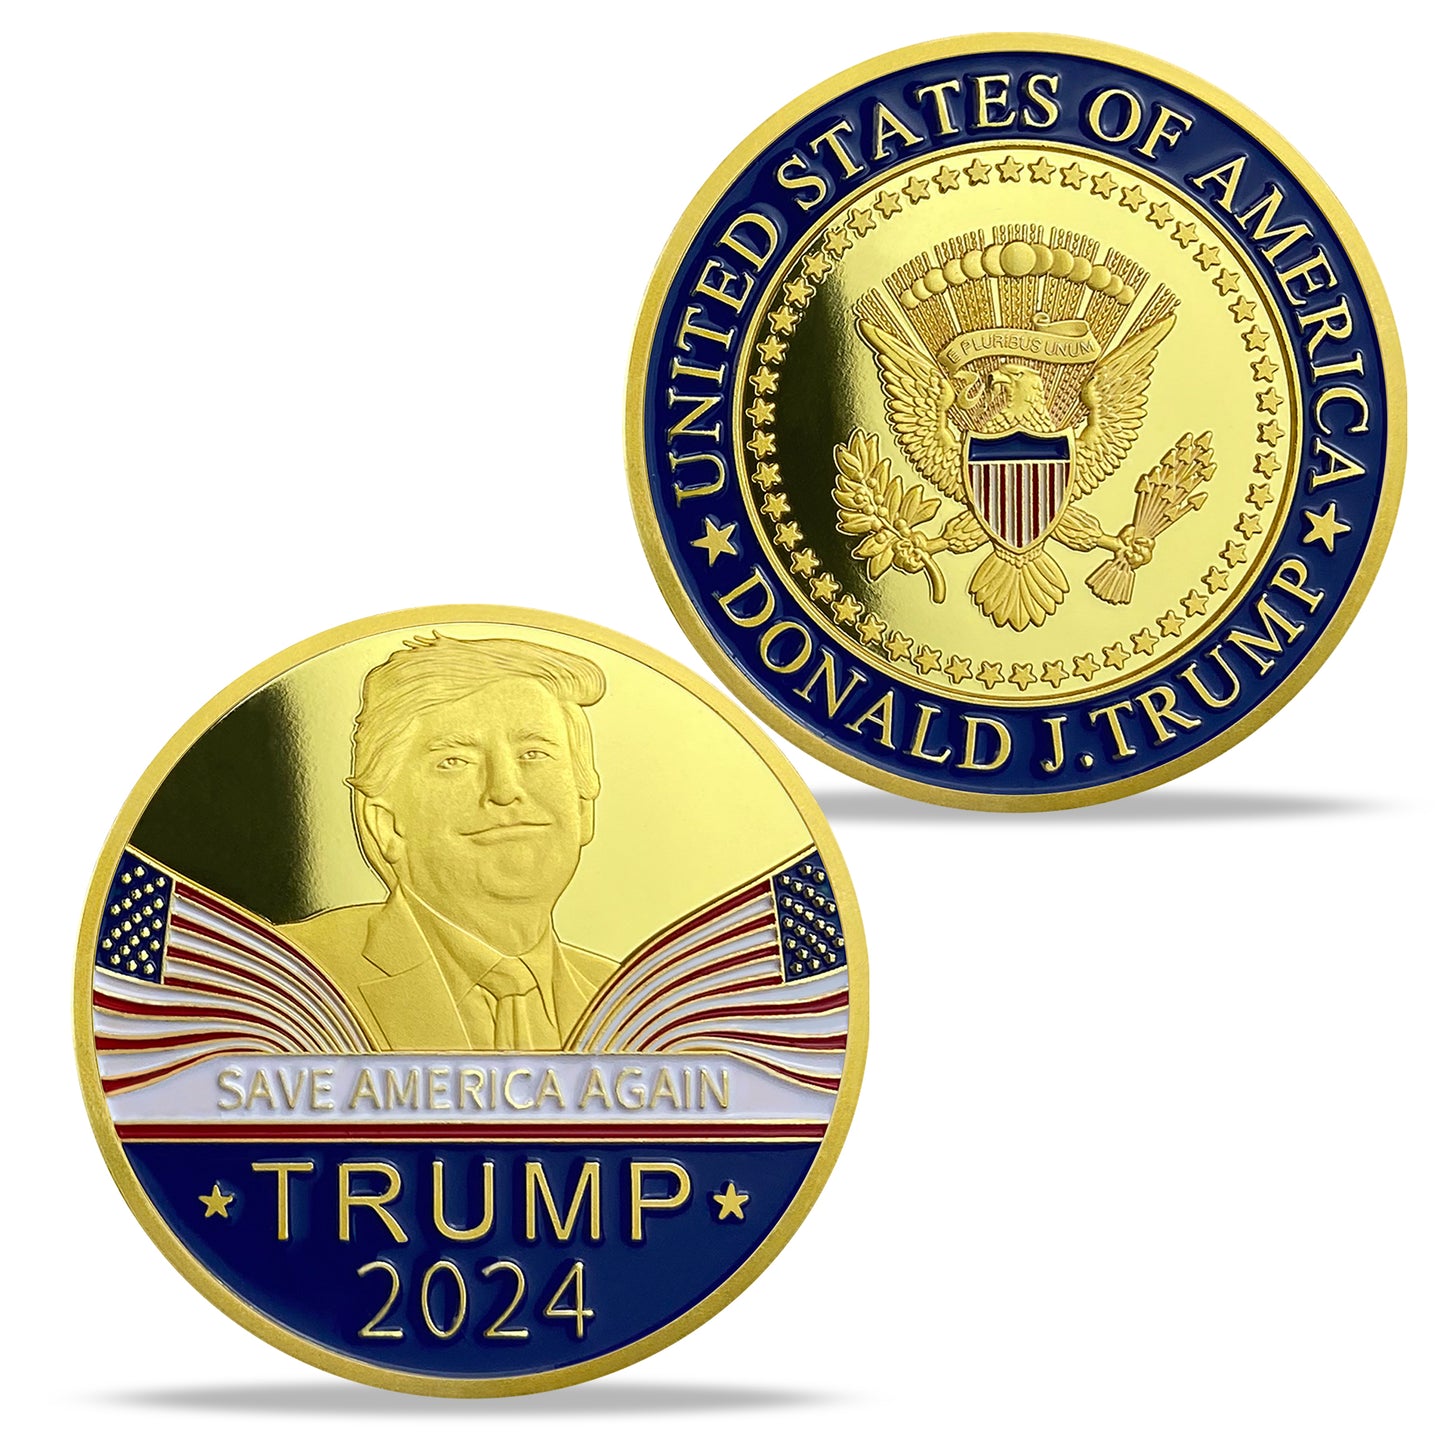 Trump 2024 The President Seal Challenge Coin 3D Gold Finish Collectible Gift Coin